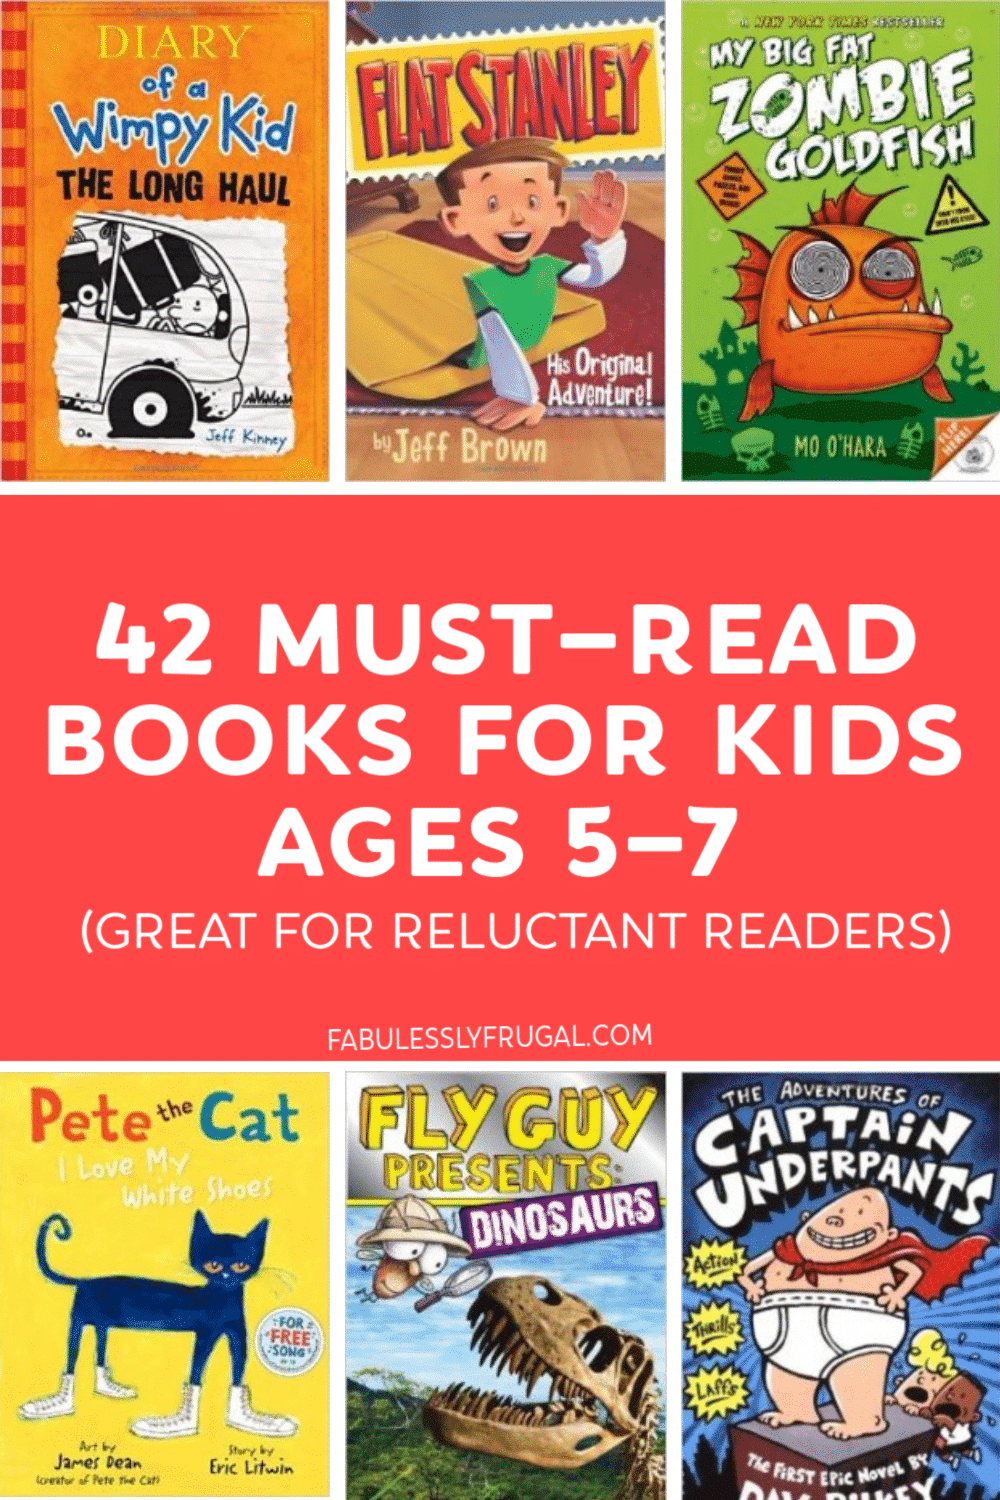 42 Top Books for Kids Ages 5-7 - Fabulessly Frugal